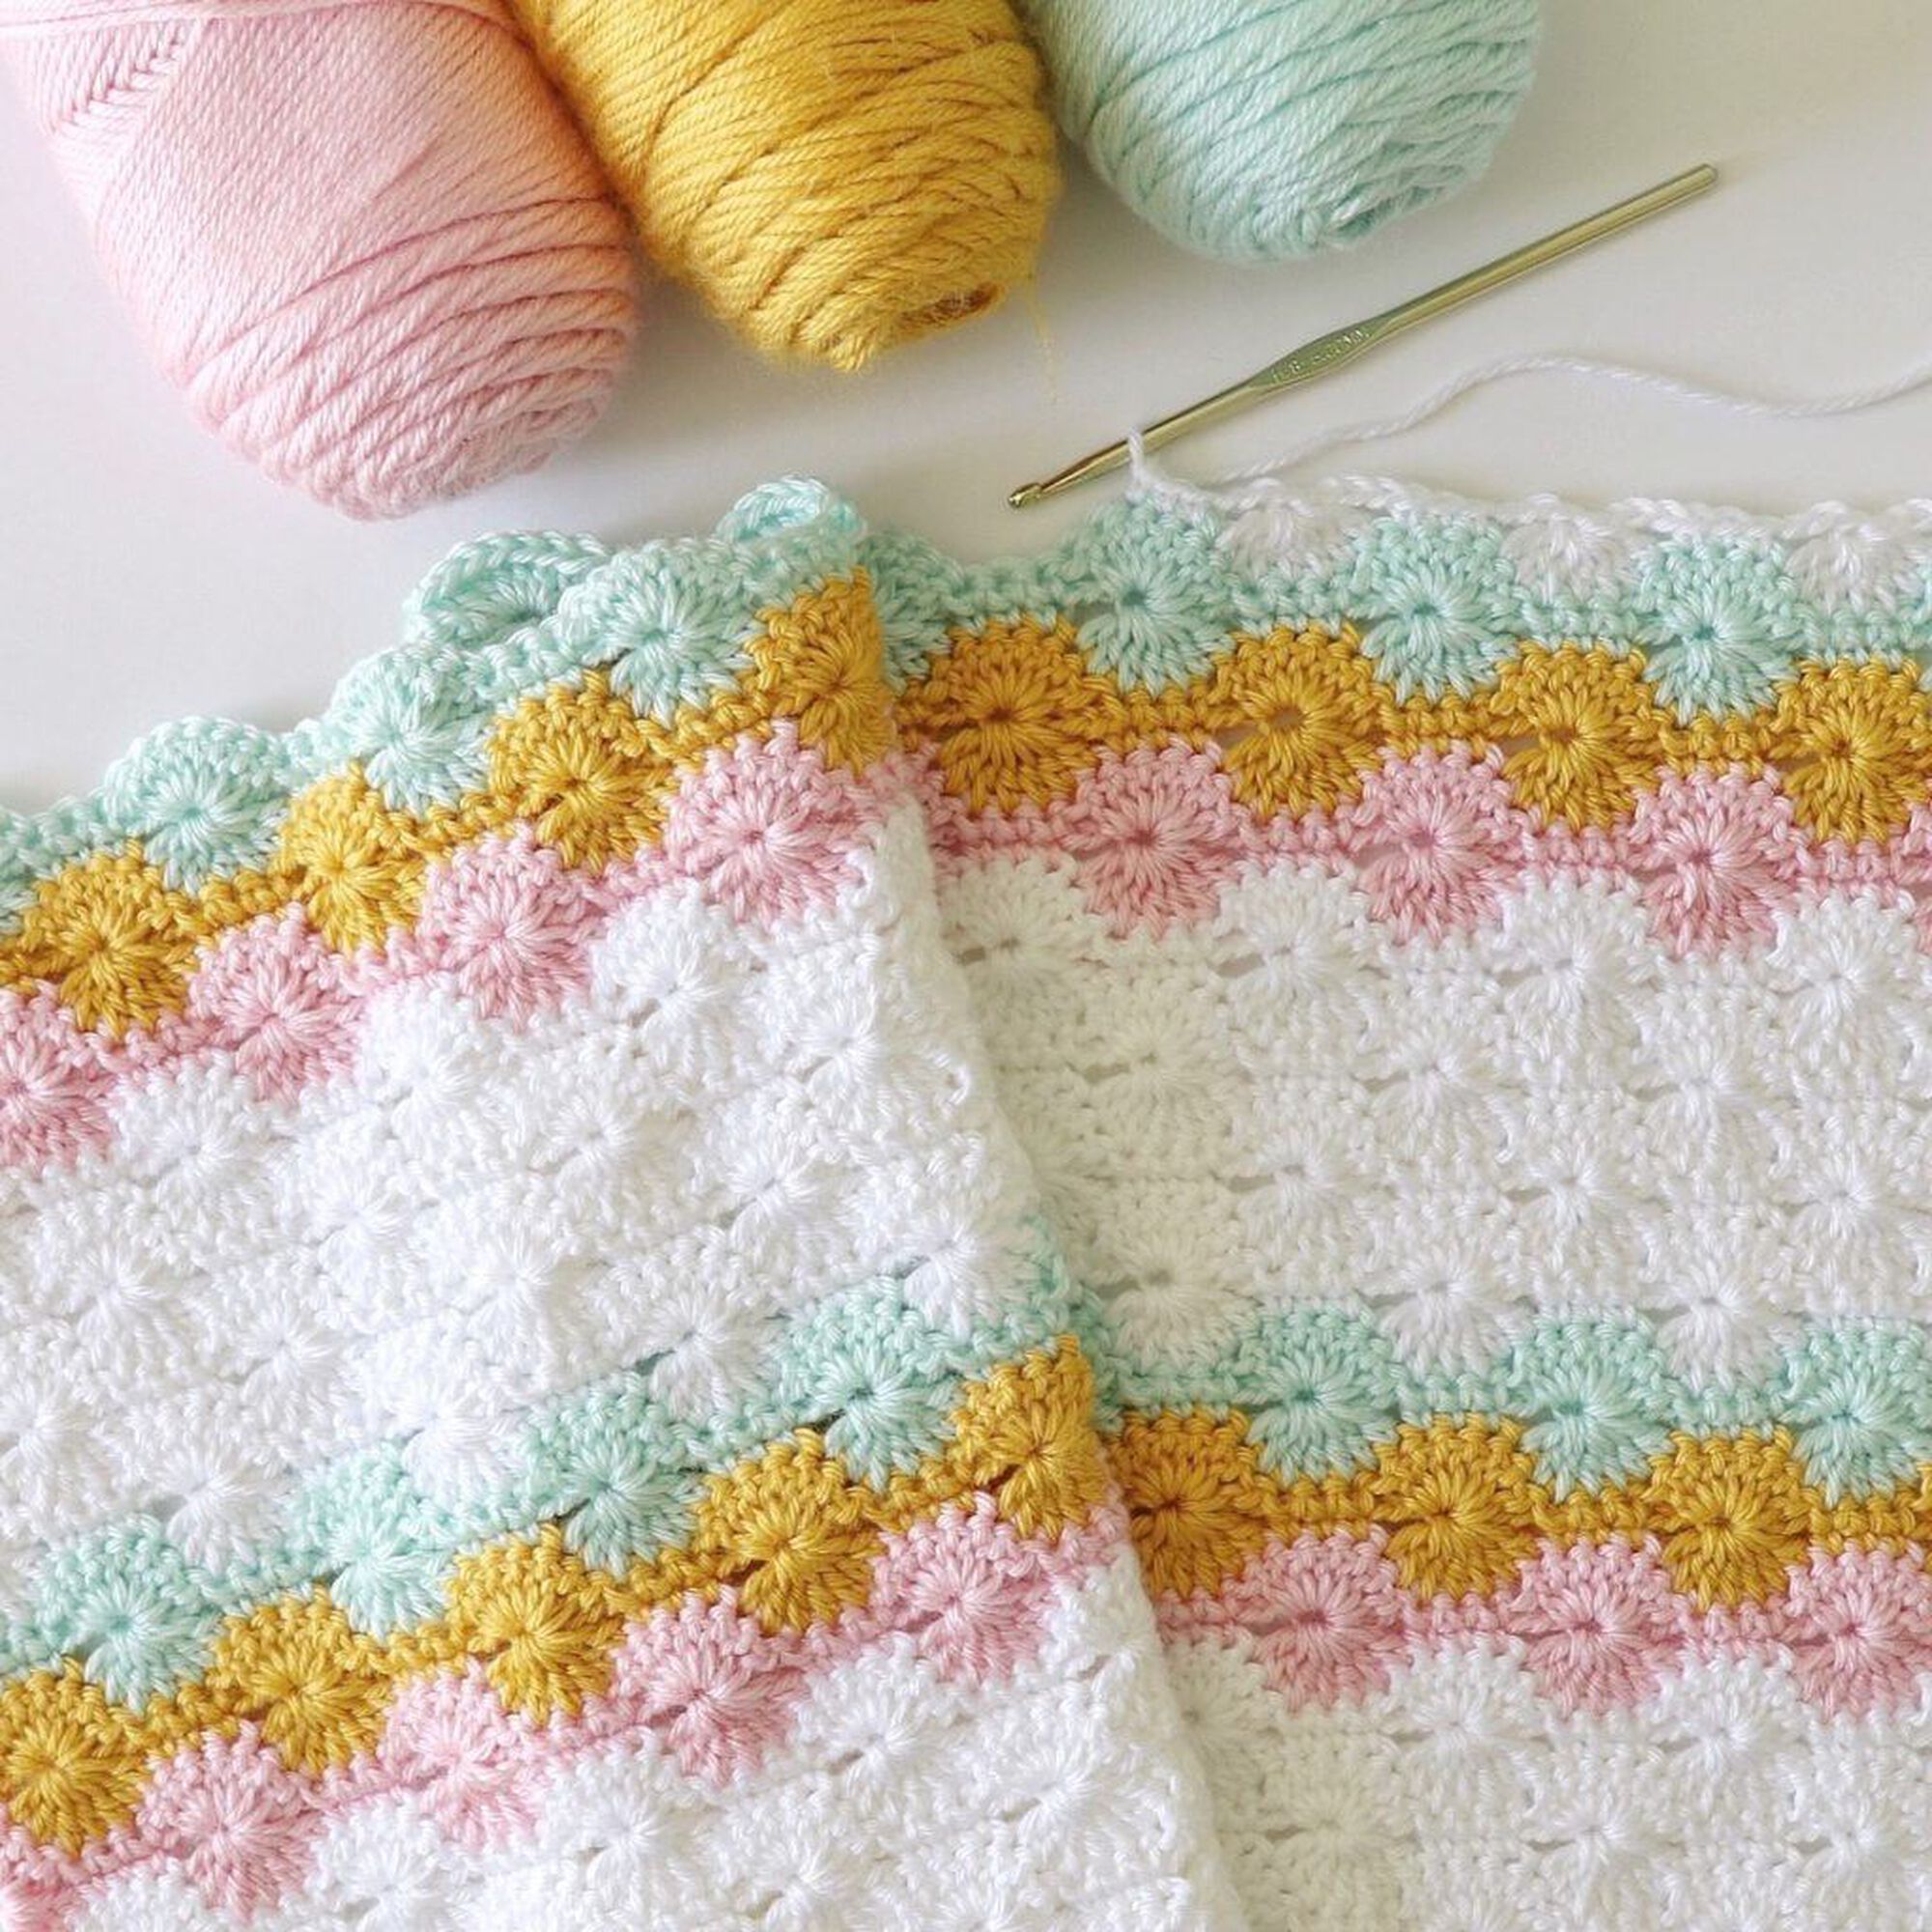 Catherine's Wheel Stitch Blanket Crochet Pattern: Step by Step Written Instructions And Video Tutorial